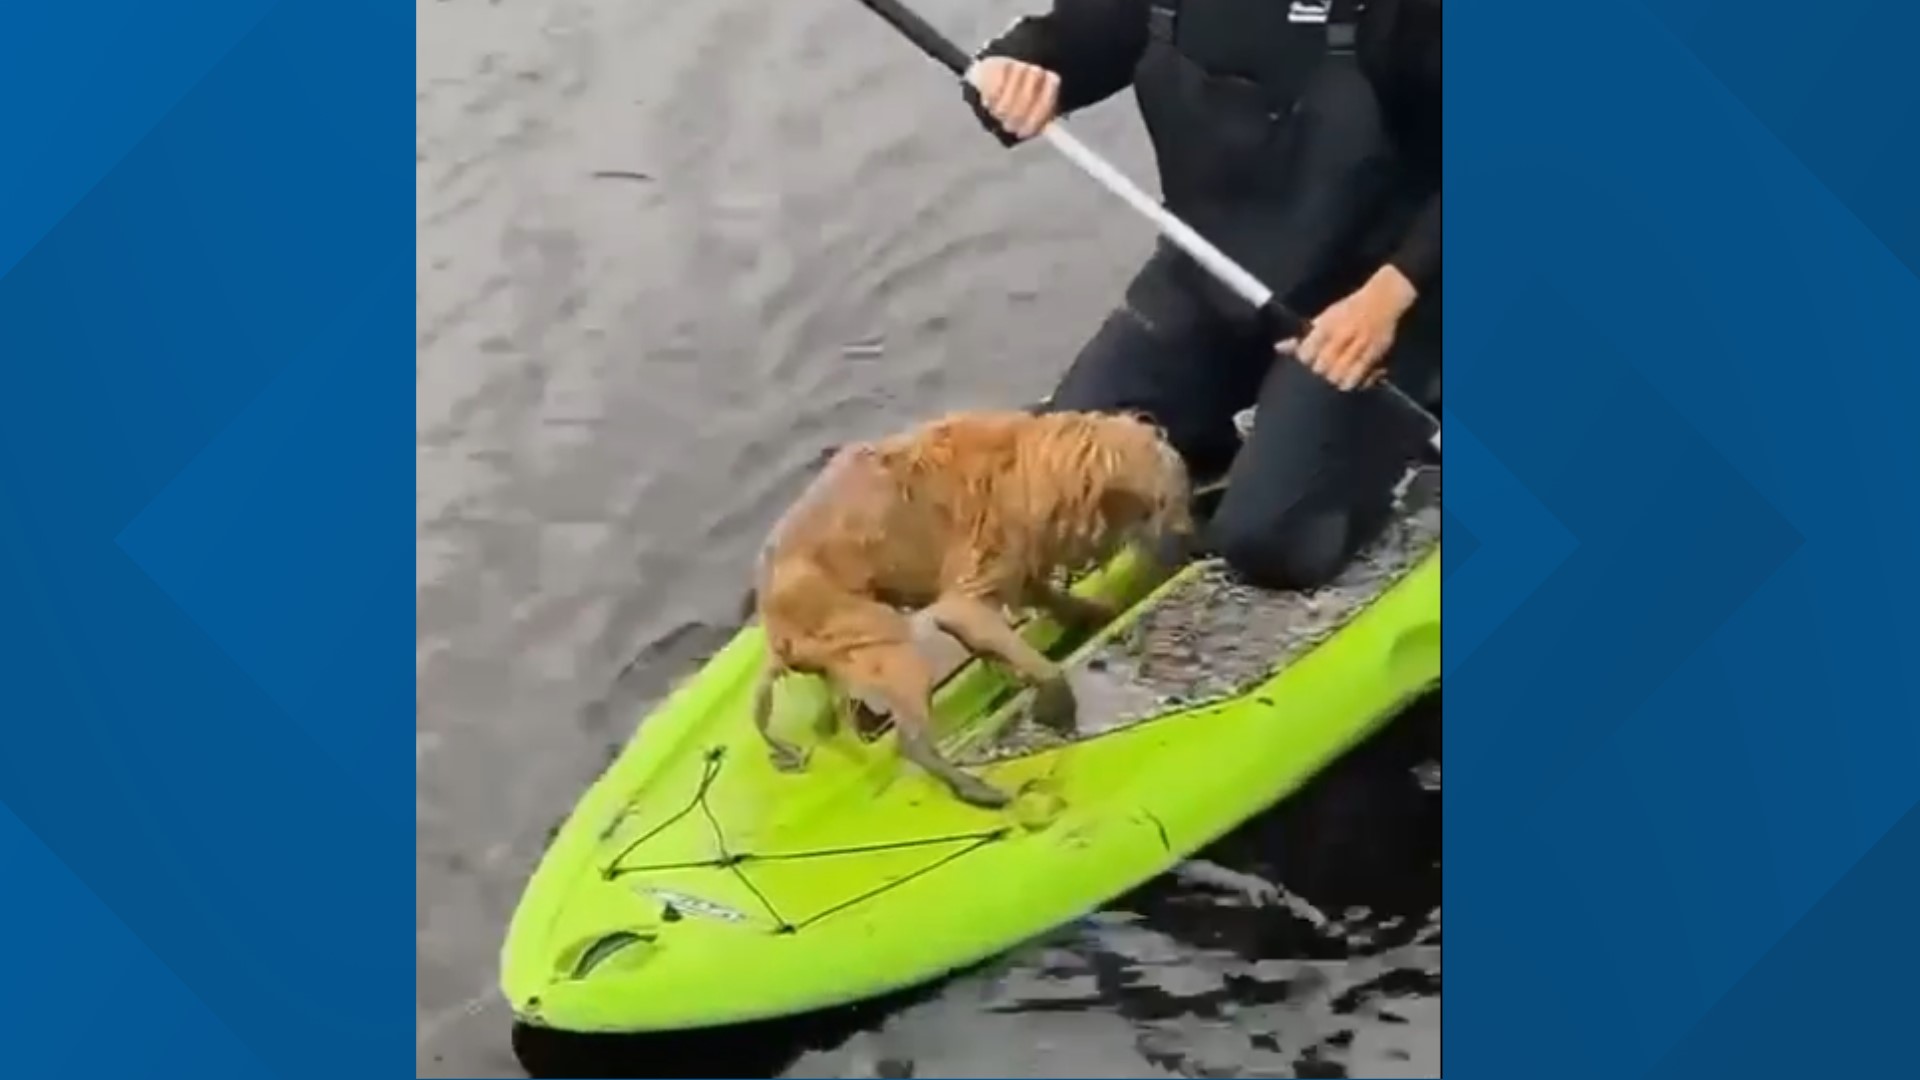 A video shows a man recovering a dog from the Nassau Sound Thursday morning.